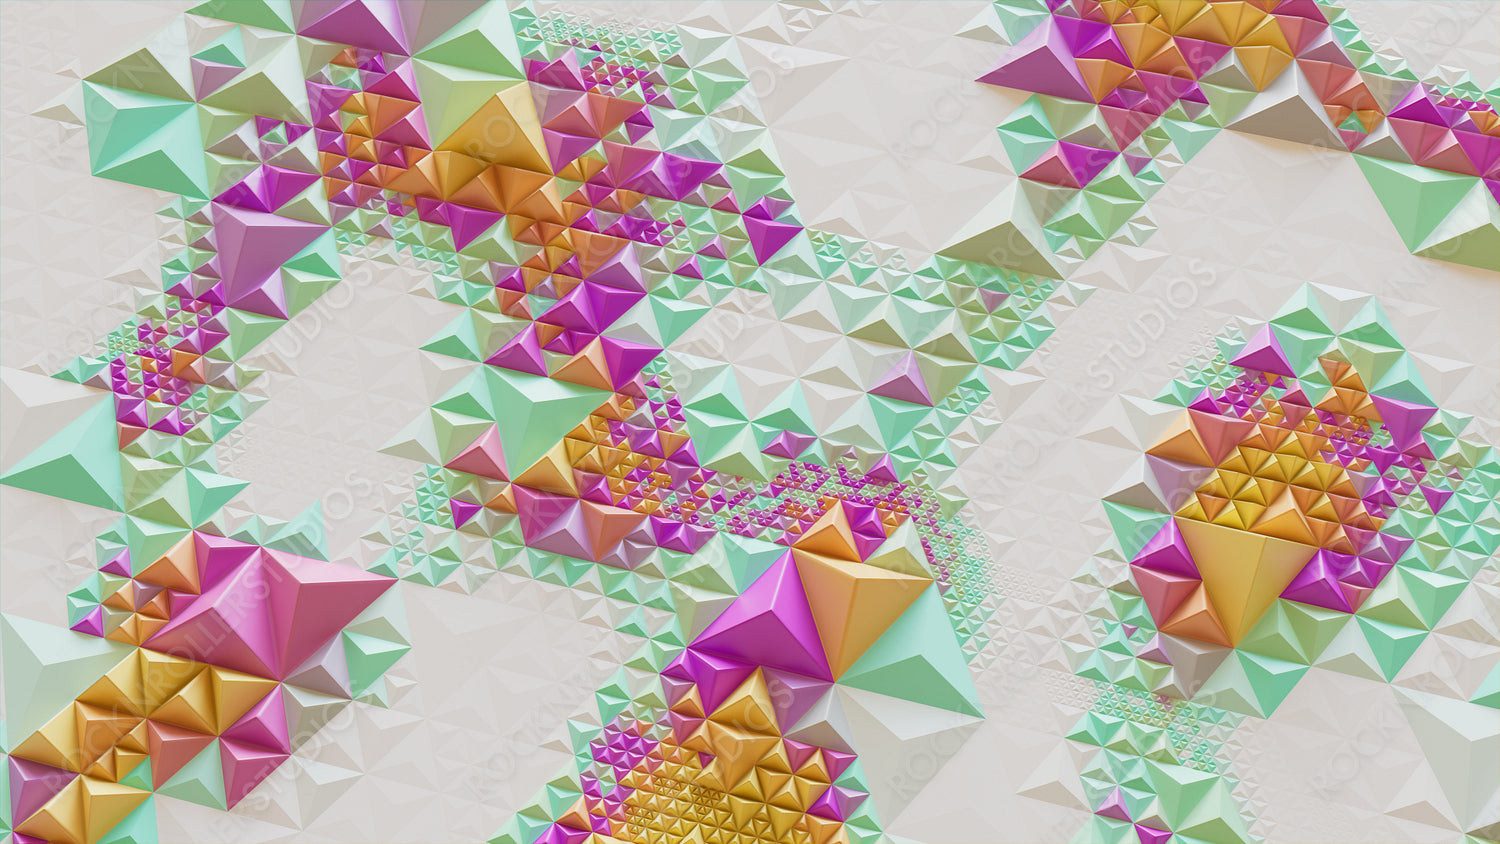 Bright High Tech Surface with Triangular Pyramids. Multicolored Geometric 3d Wallpaper.